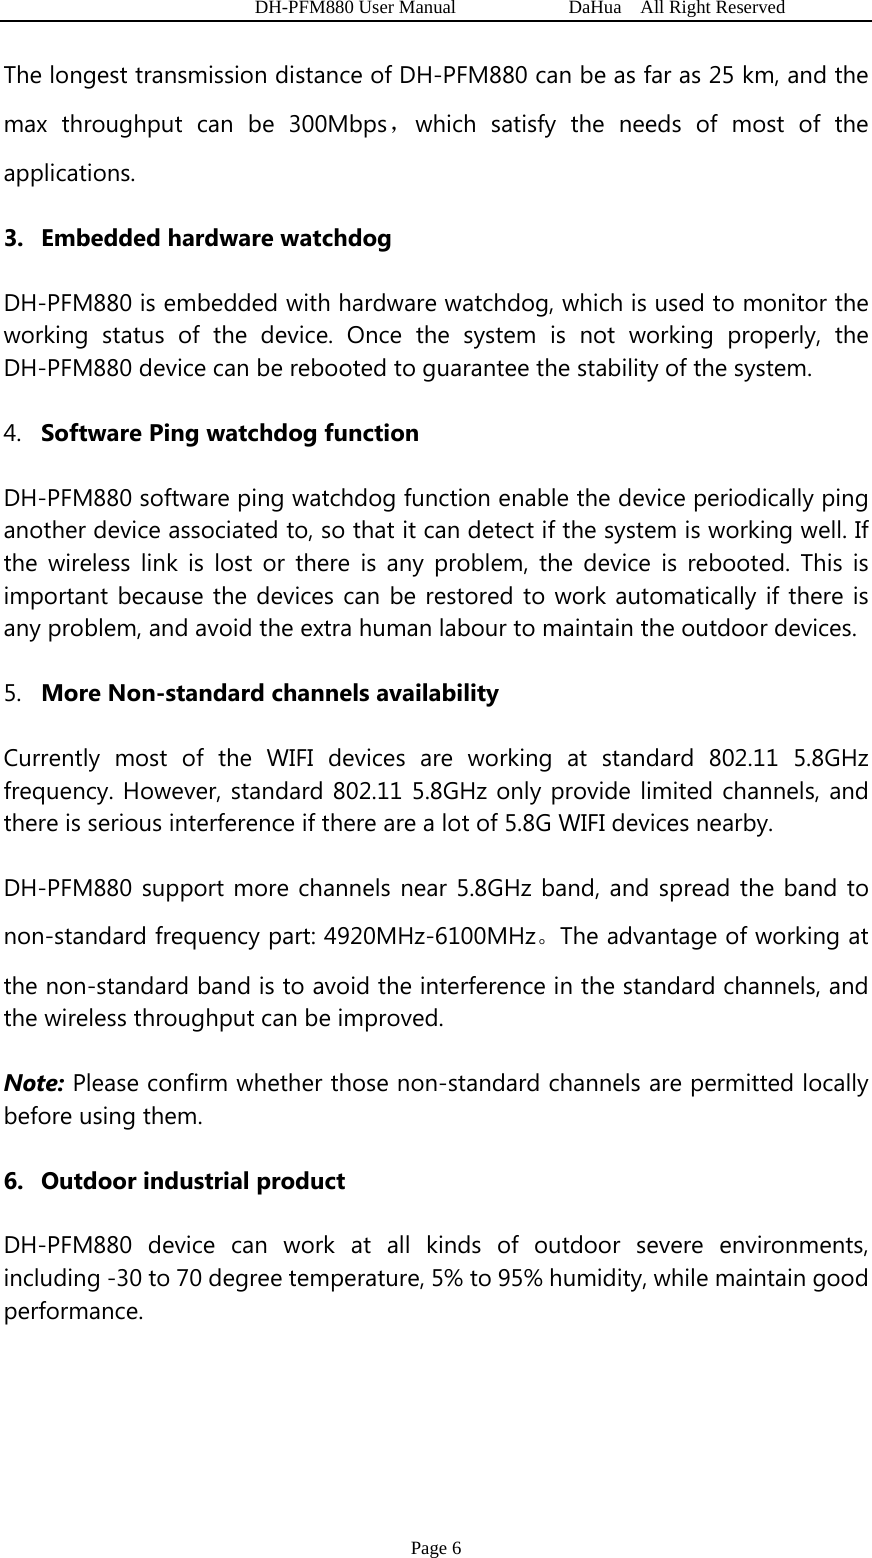   DH-PFM880 User Manual            DaHua  All Right Reserved Page 6 The longest transmission distance of DH-PFM880 can be as far as 25 km, and the max throughput can be 300Mbps，which satisfy the needs of most of the applications. 3. Embedded hardware watchdog DH-PFM880 is embedded with hardware watchdog, which is used to monitor the working status of the device. Once the system is not working properly, the DH-PFM880 device can be rebooted to guarantee the stability of the system. 4. Software Ping watchdog function DH-PFM880 software ping watchdog function enable the device periodically ping another device associated to, so that it can detect if the system is working well. If the wireless link is lost or there is any problem, the device is rebooted. This is important because the devices can be restored to work automatically if there is any problem, and avoid the extra human labour to maintain the outdoor devices. 5. More Non-standard channels availability Currently most of the WIFI devices are working at standard 802.11 5.8GHz frequency. However, standard 802.11 5.8GHz only provide limited channels, and there is serious interference if there are a lot of 5.8G WIFI devices nearby.   DH-PFM880 support more channels near 5.8GHz band, and spread the band to non-standard frequency part: 4920MHz-6100MHz。The advantage of working at the non-standard band is to avoid the interference in the standard channels, and the wireless throughput can be improved. Note: Please confirm whether those non-standard channels are permitted locally before using them. 6. Outdoor industrial product DH-PFM880 device can work at all kinds of outdoor severe environments, including -30 to 70 degree temperature, 5% to 95% humidity, while maintain good performance.  